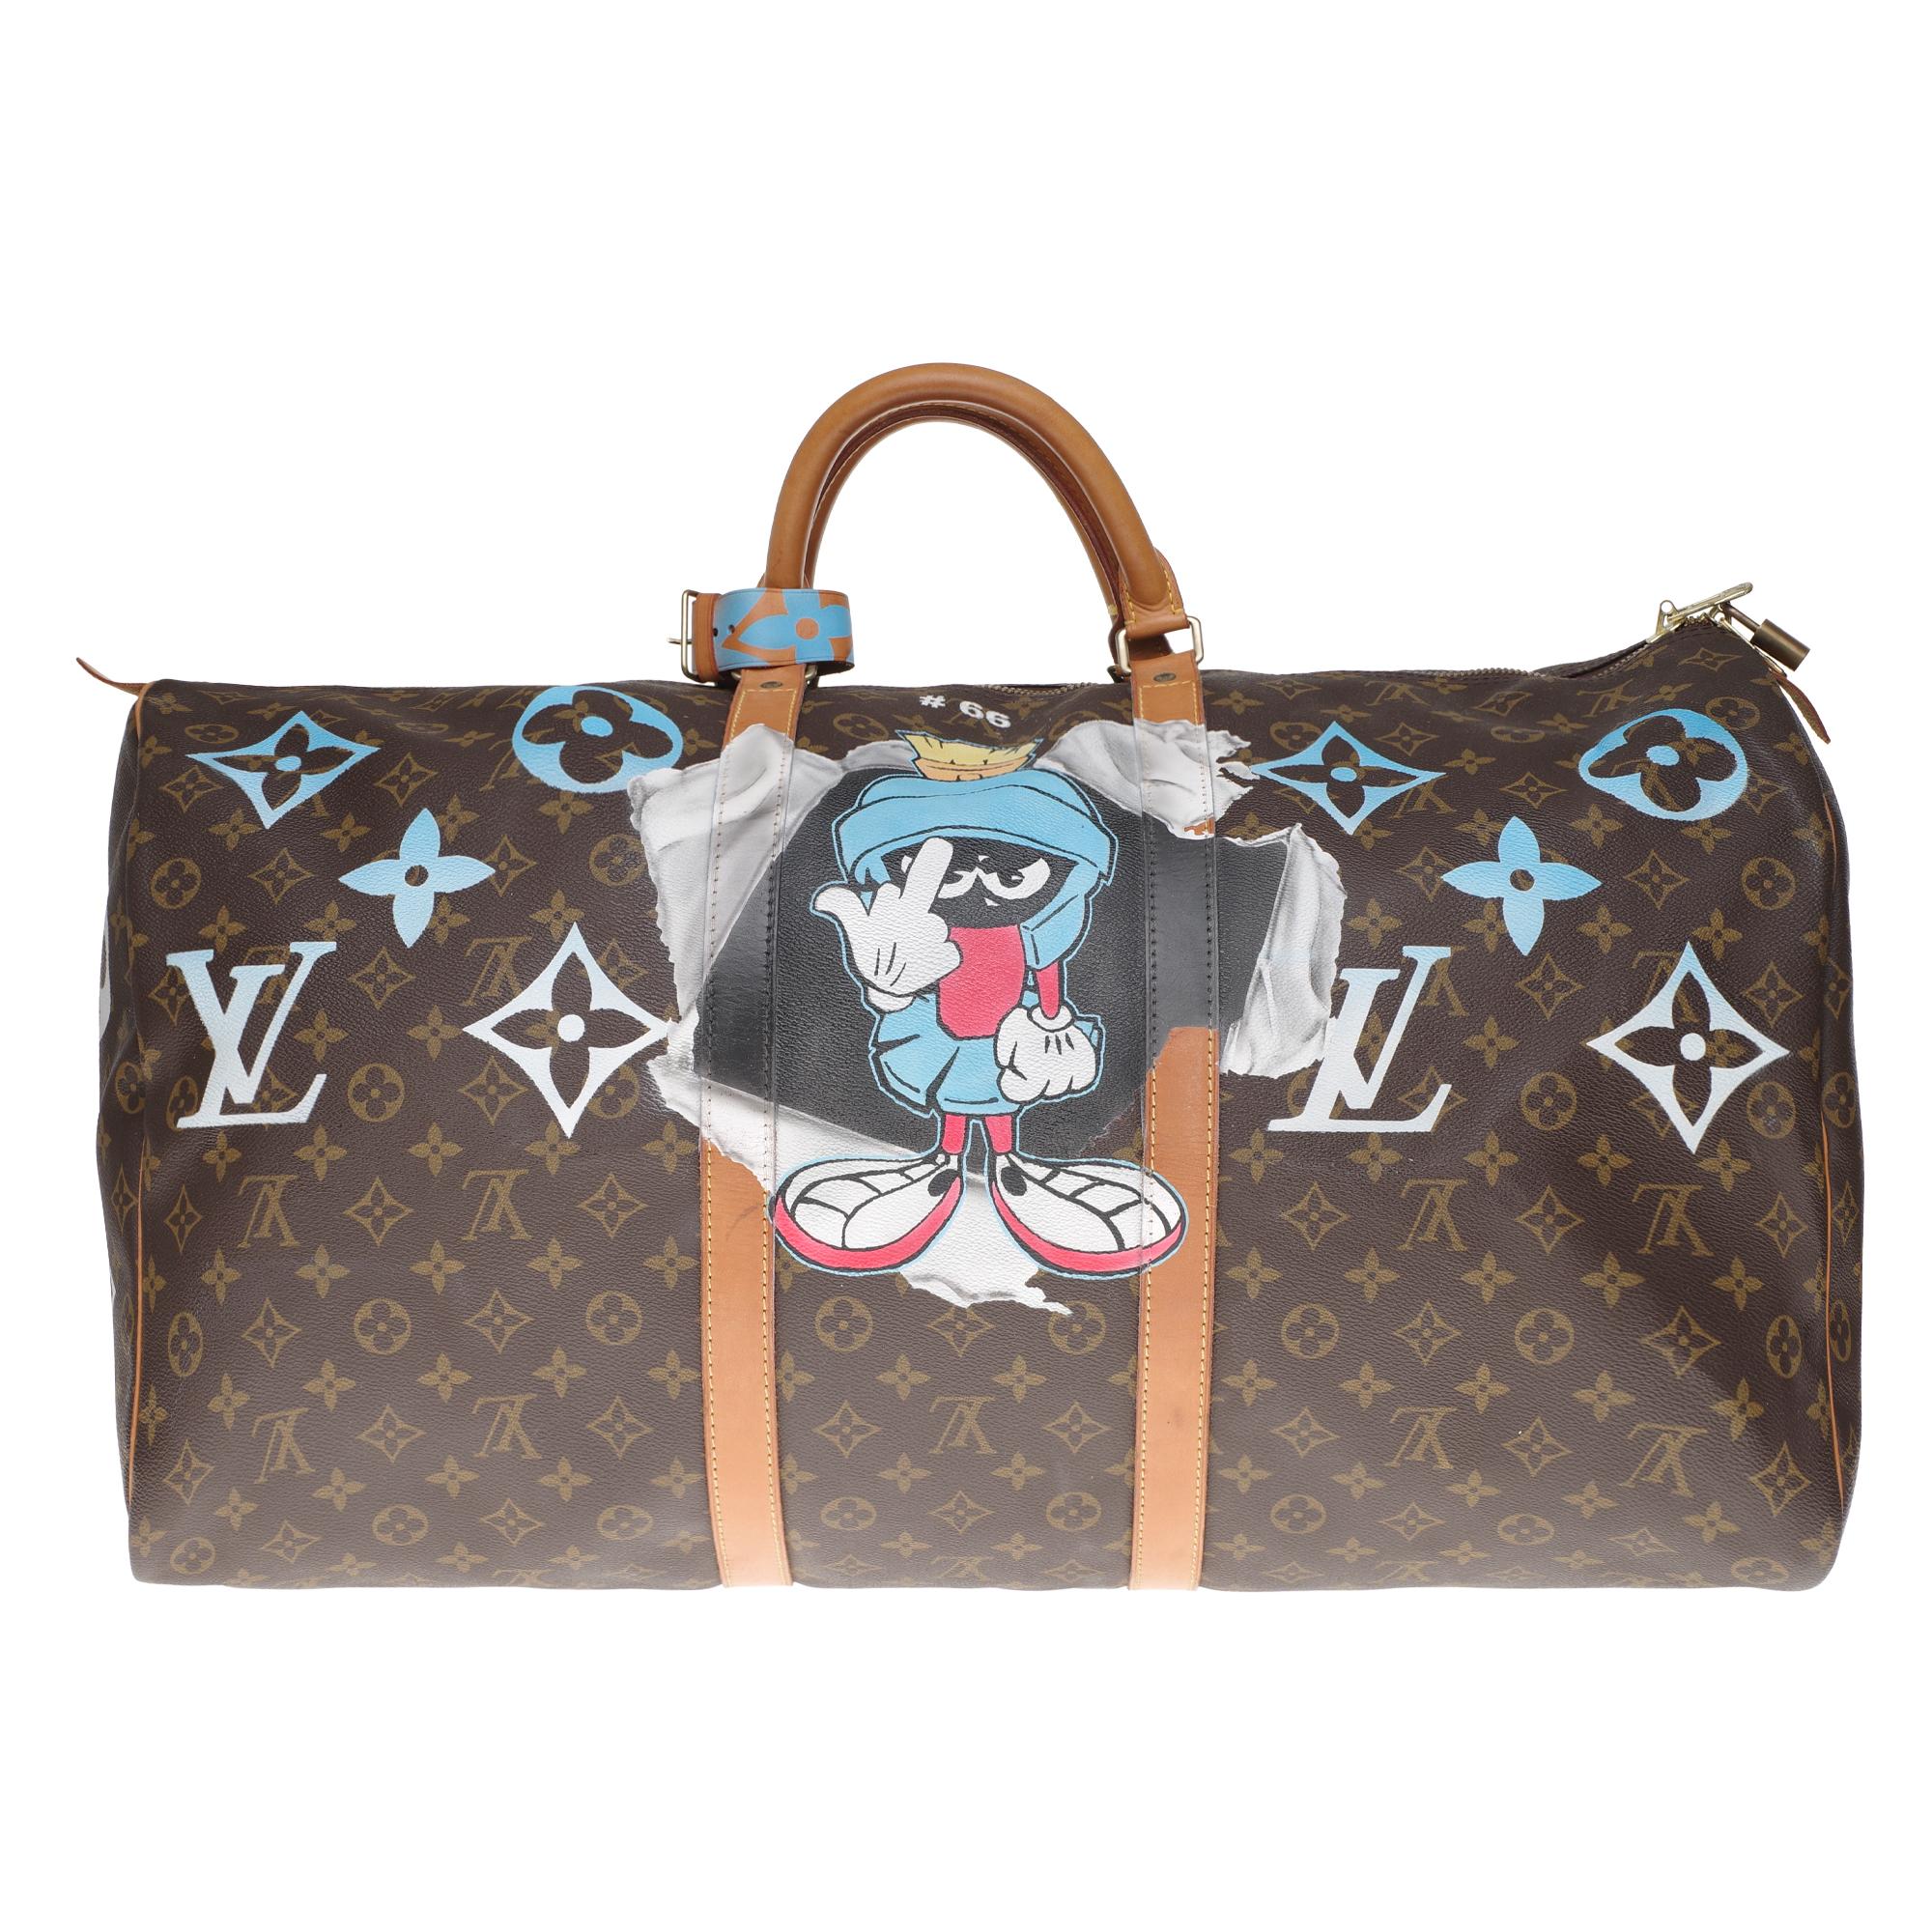 Louis Vuitton Fashion Sketches - 2 For Sale on 1stDibs